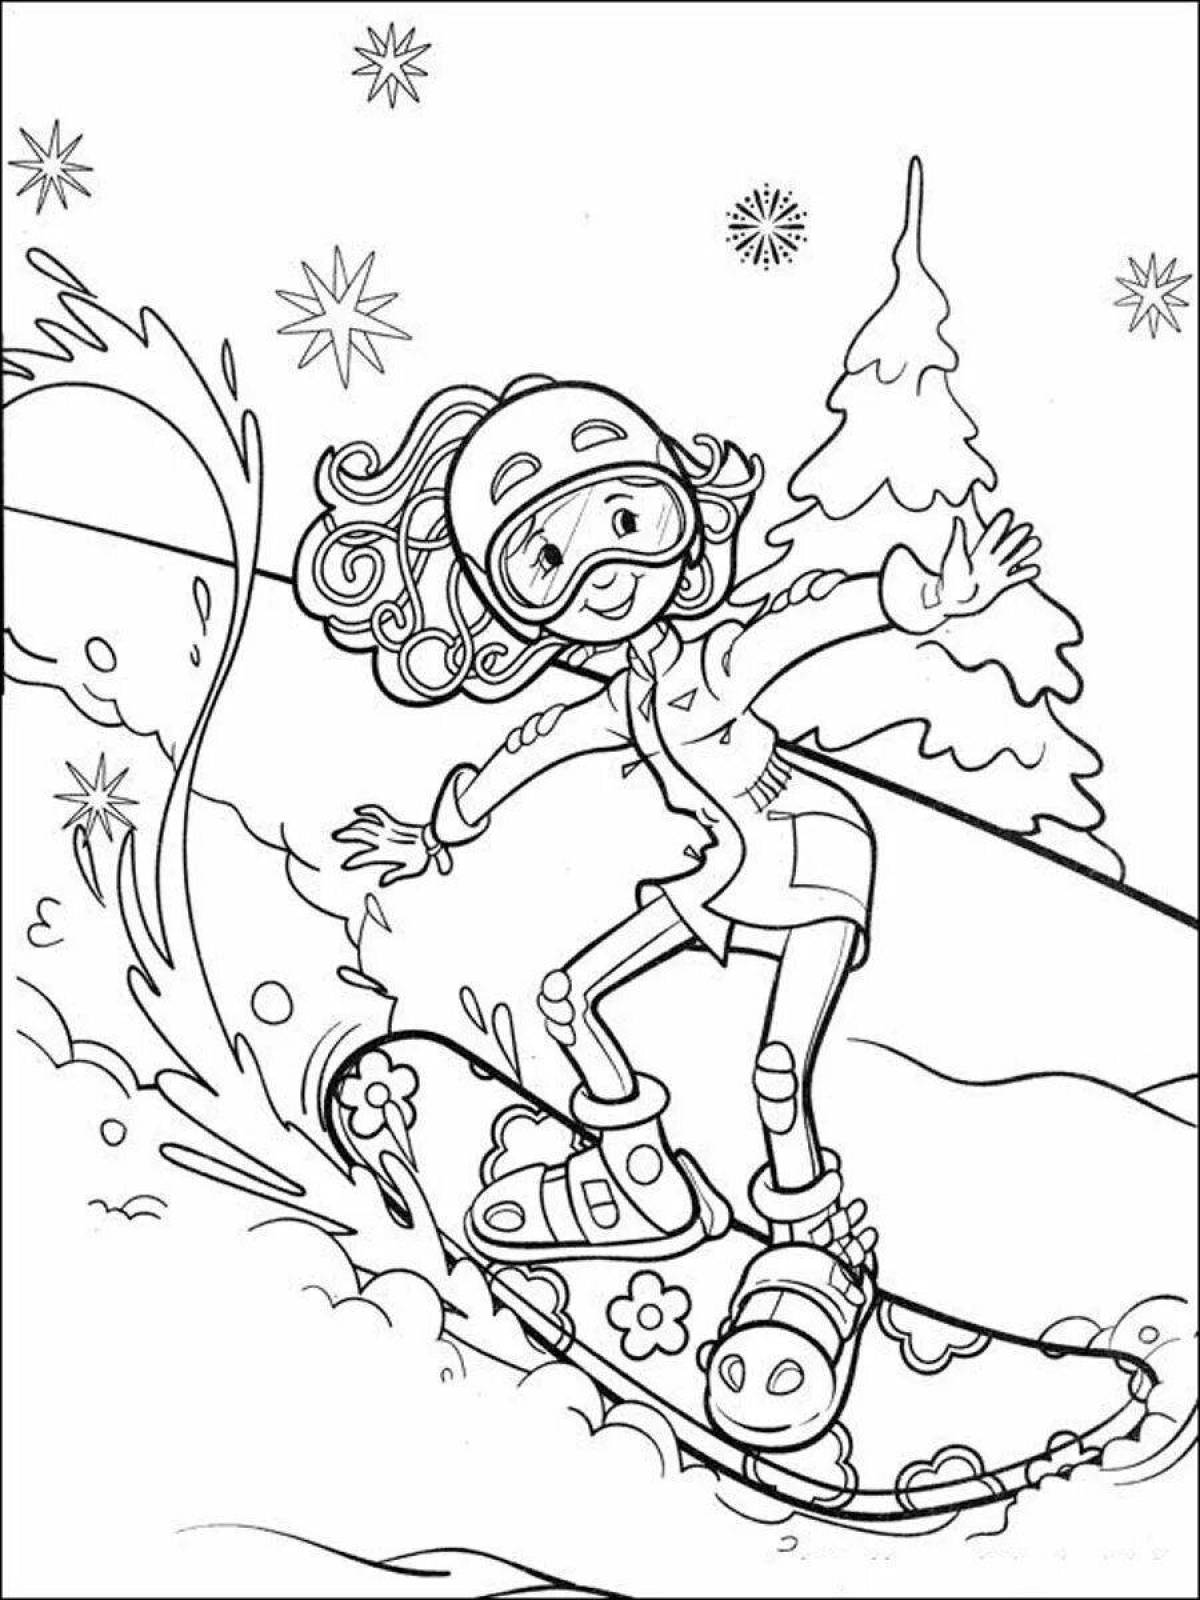 Fun coloring by numbers winter sports